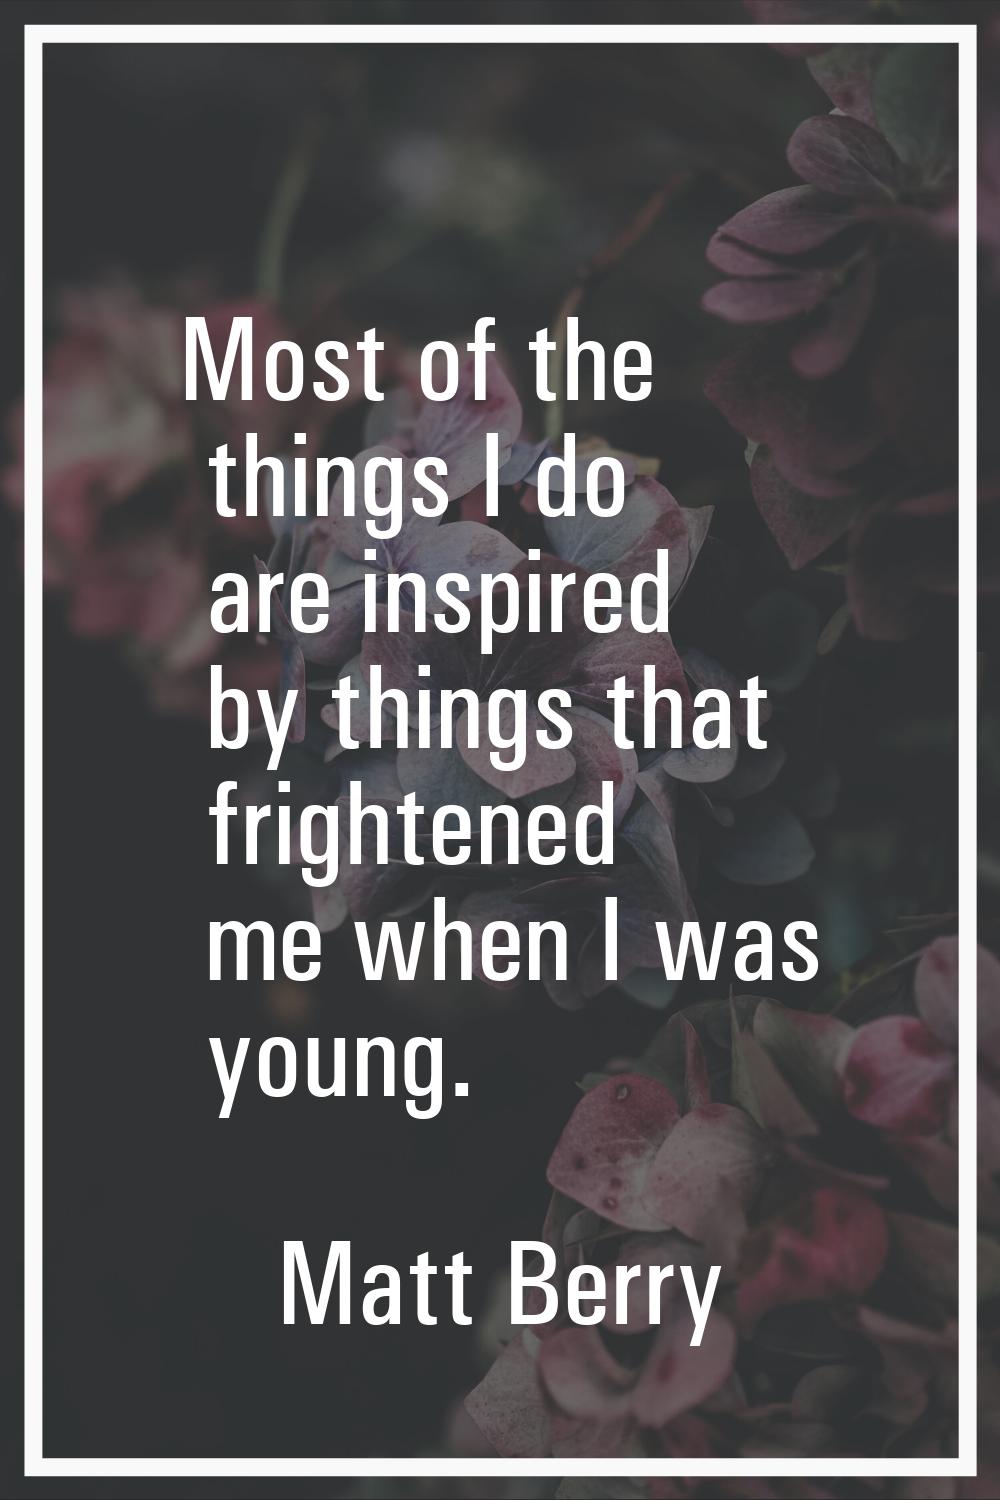 Most of the things I do are inspired by things that frightened me when I was young.